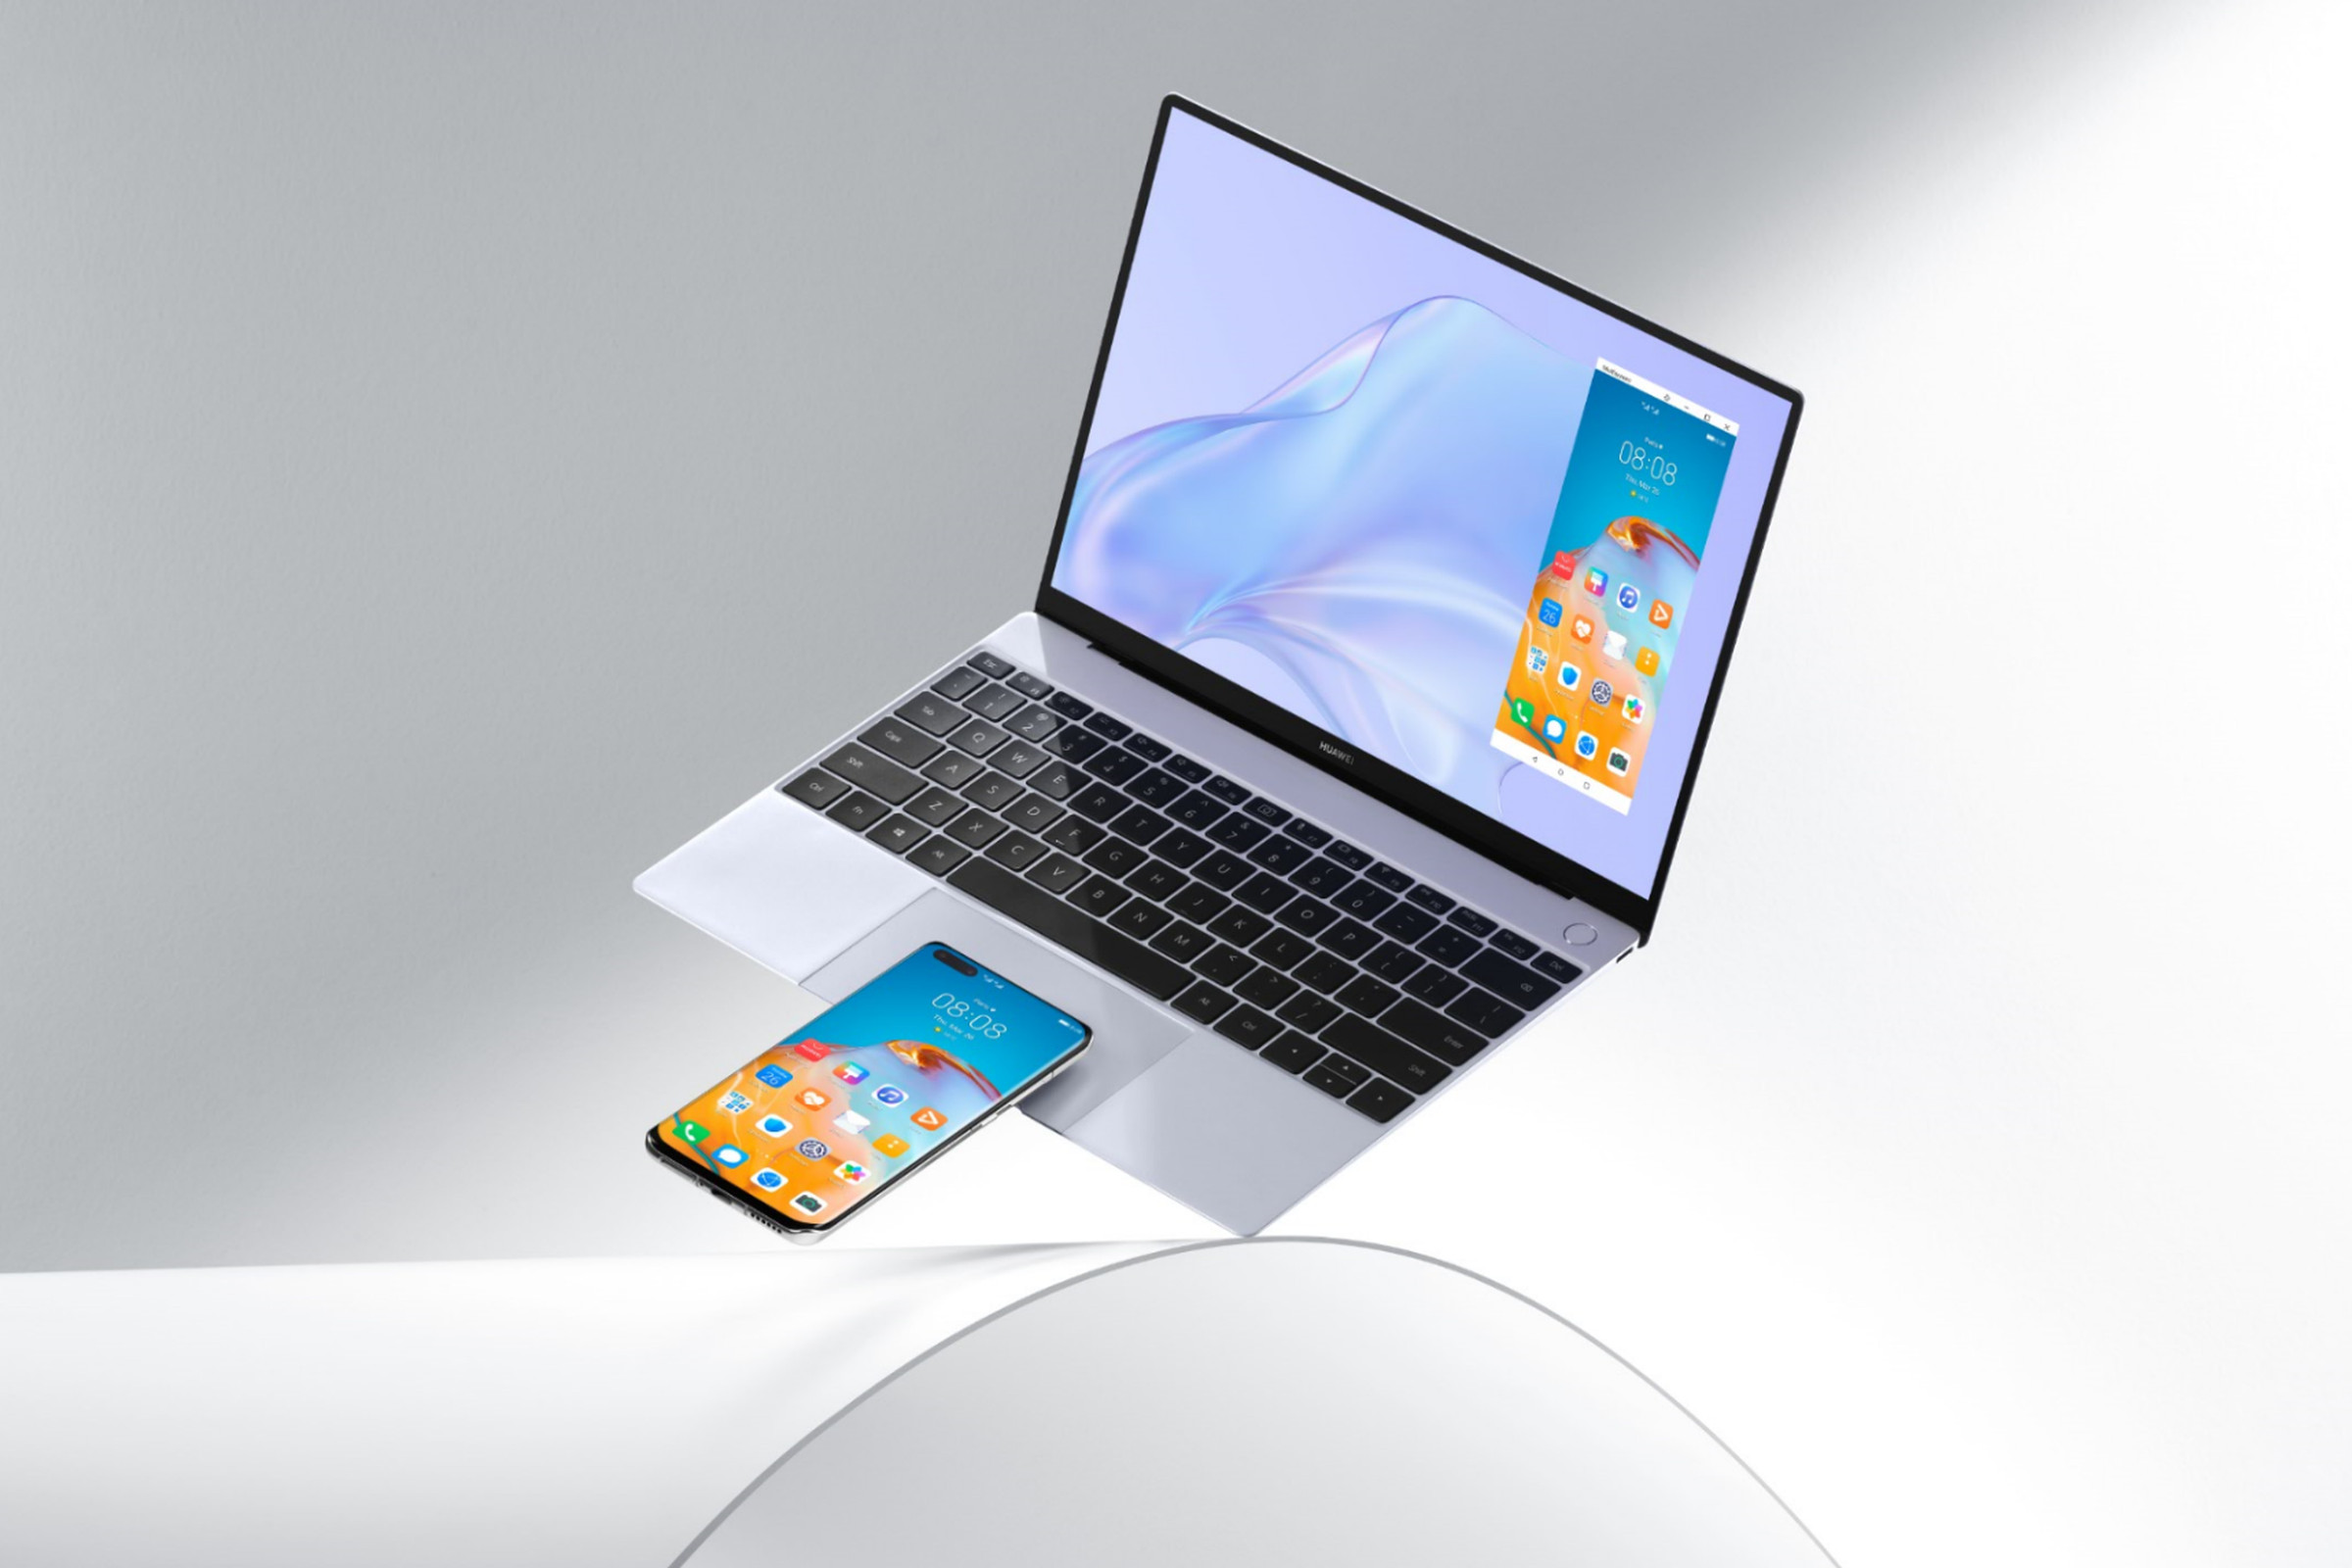 The new MateBook X features a larger trackpad with a built in NFC tag to connect to a Huawei smartphone.